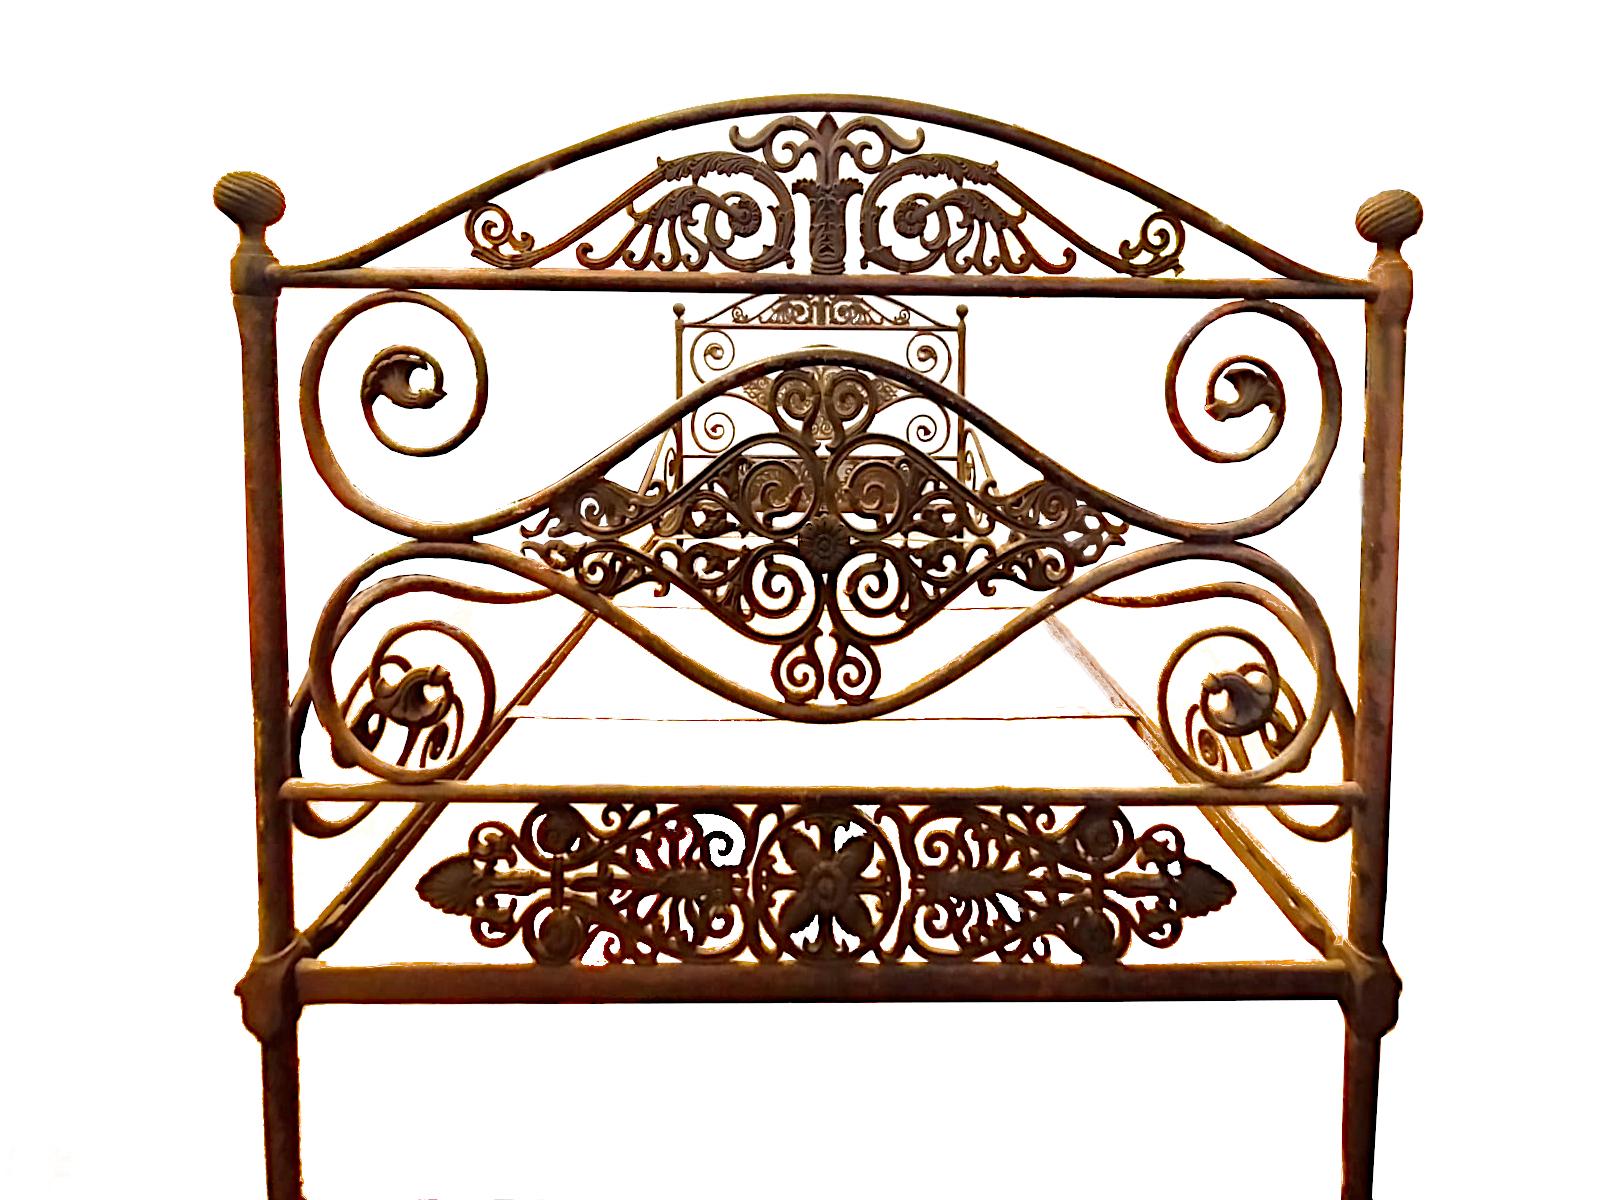 Italian bed from the 19th century in wrought iron

The timeless elegance of this early nineteenth-century Italian queen-size bed, meticulously handcrafted in wrought iron
The bed has a solid, large structure and shows considerable attention to